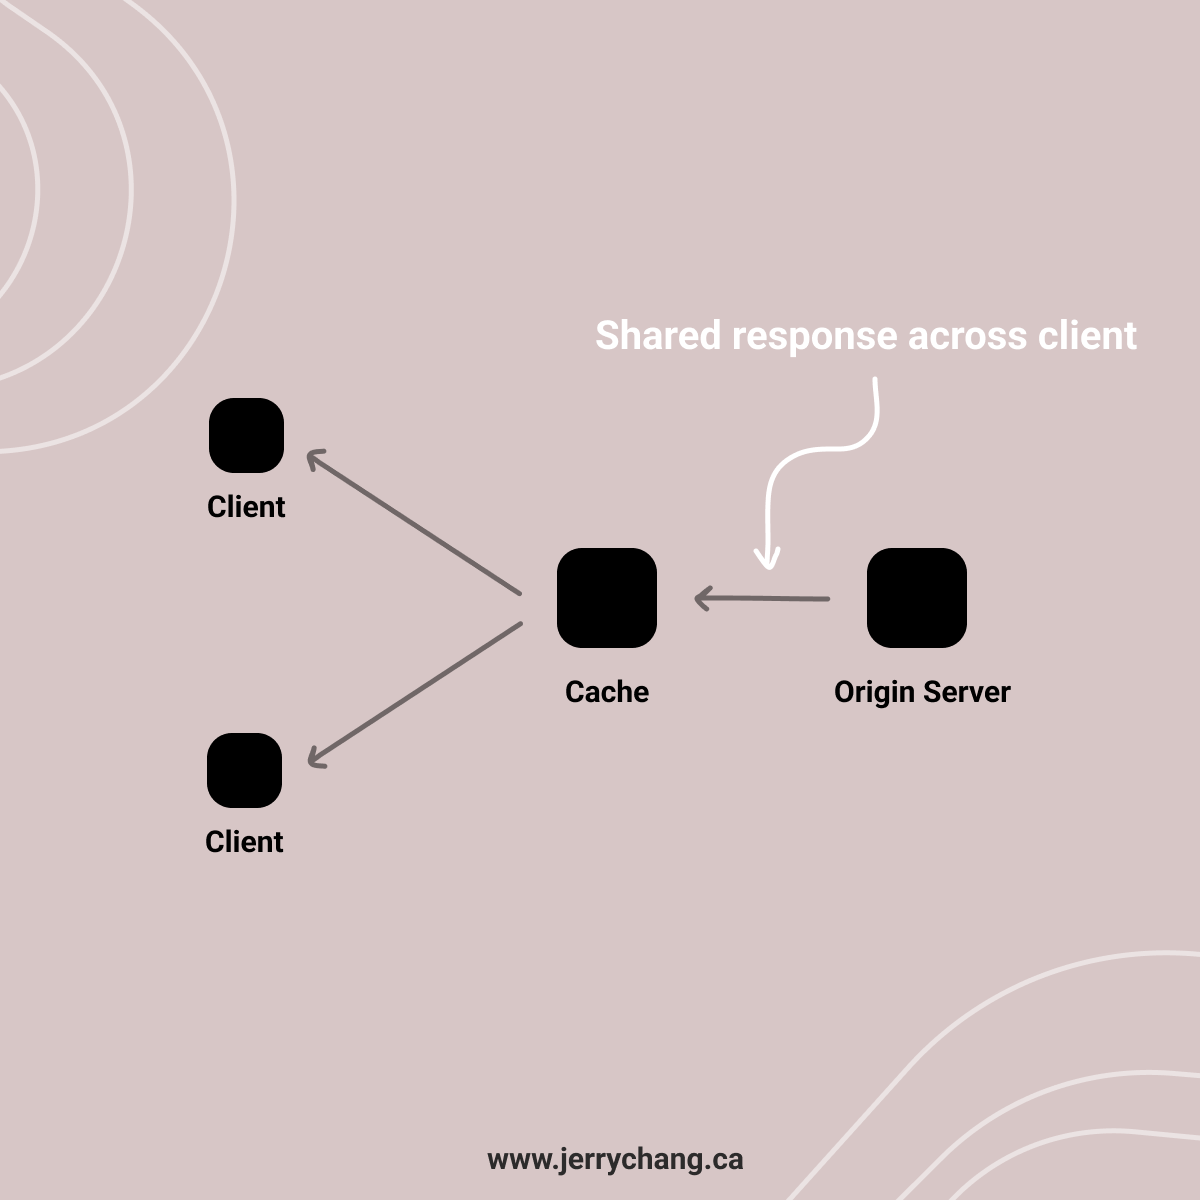 Illustration of shared response to serve multiple clients